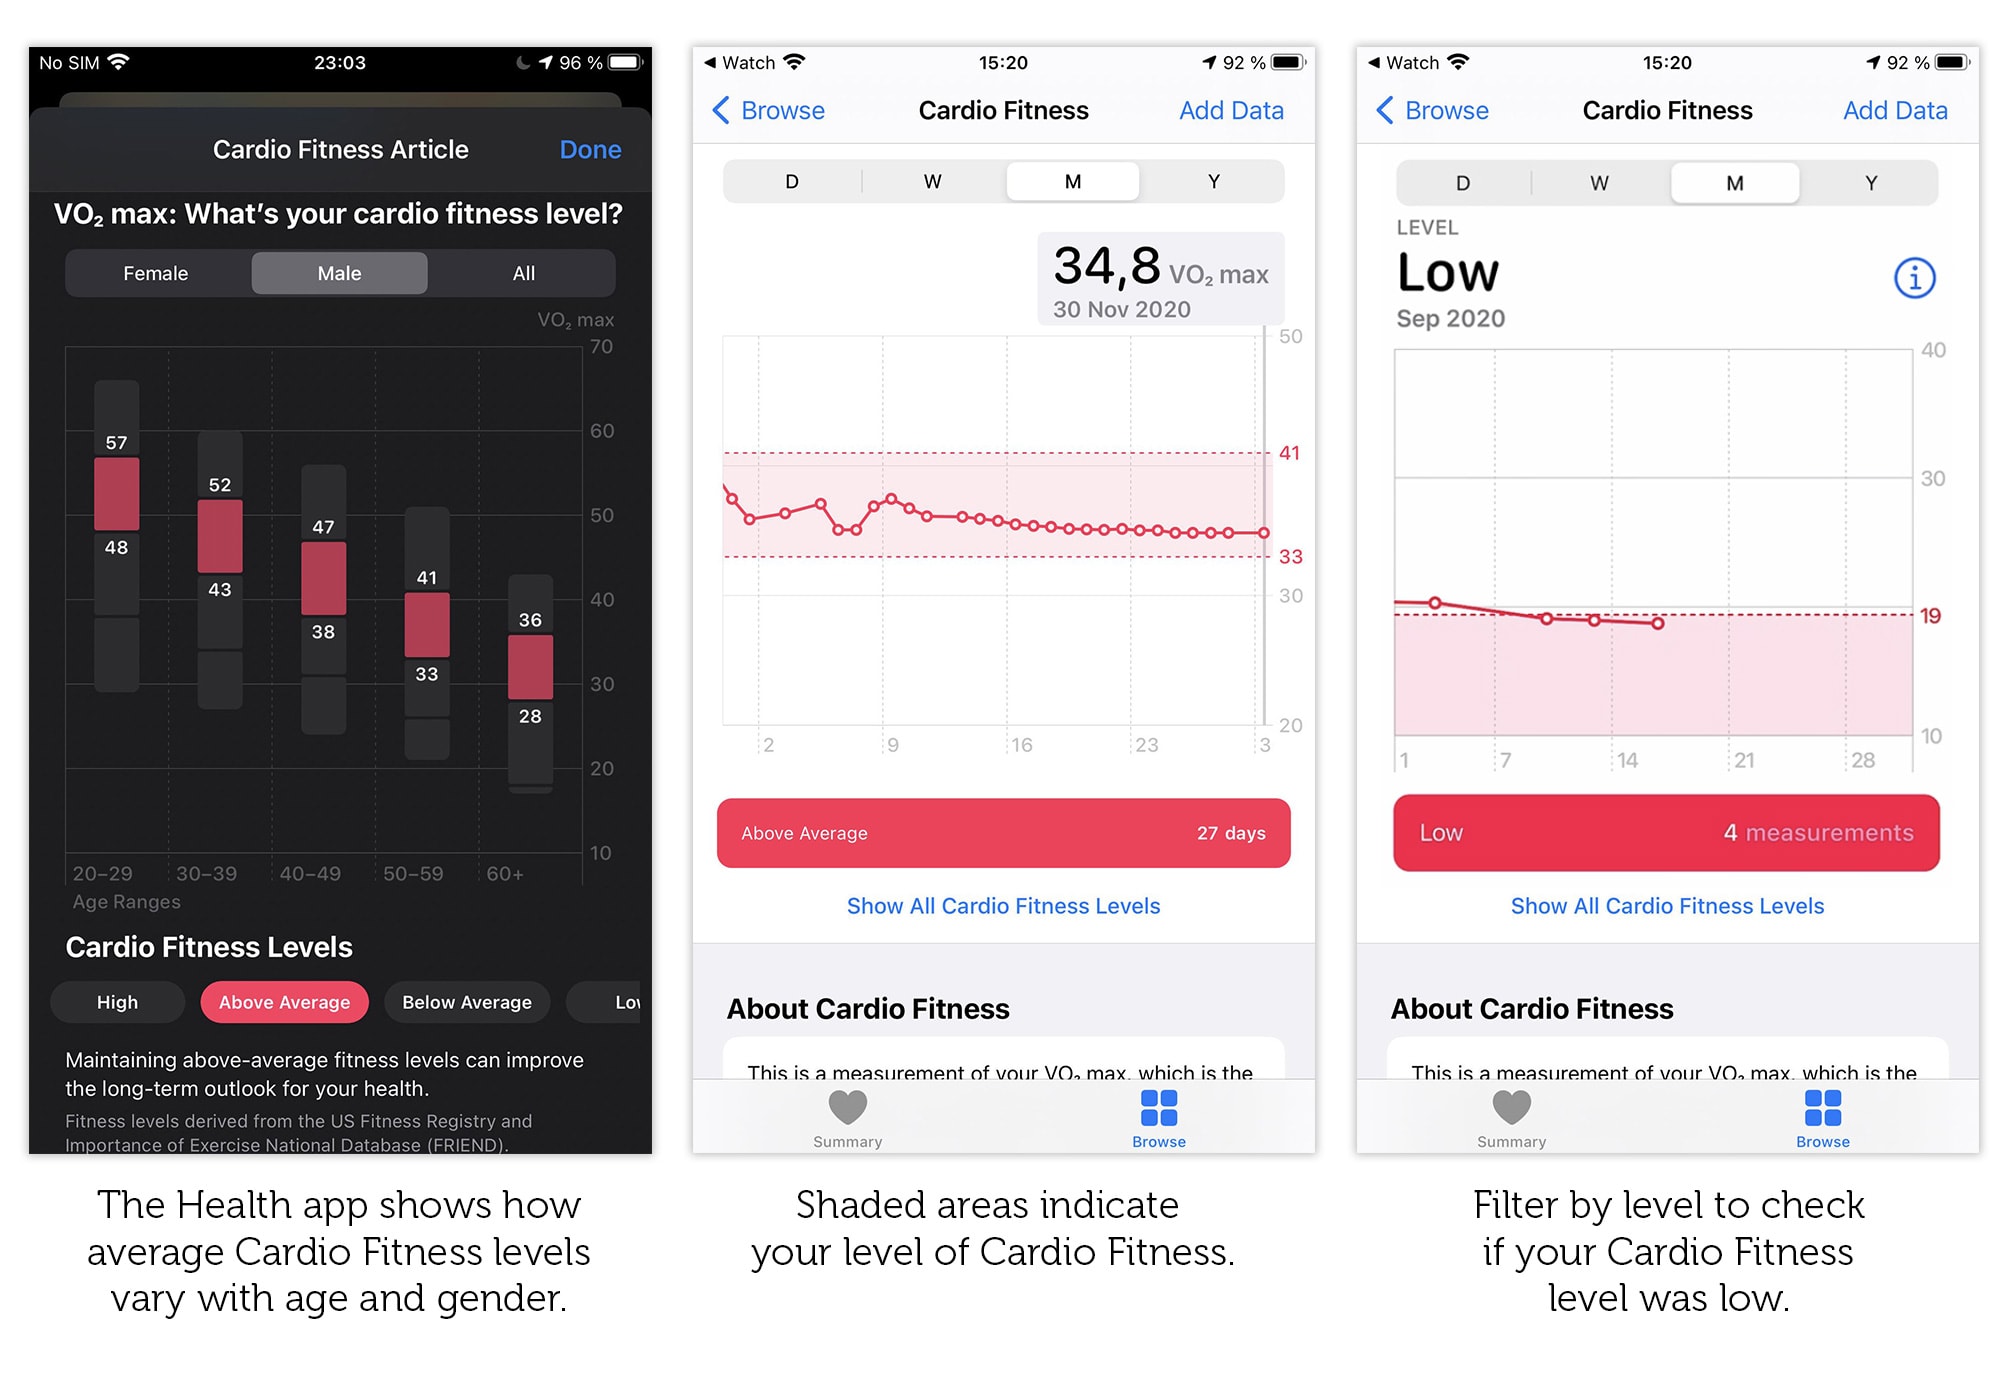 Check your Cardio Fitness Levels in the Health app